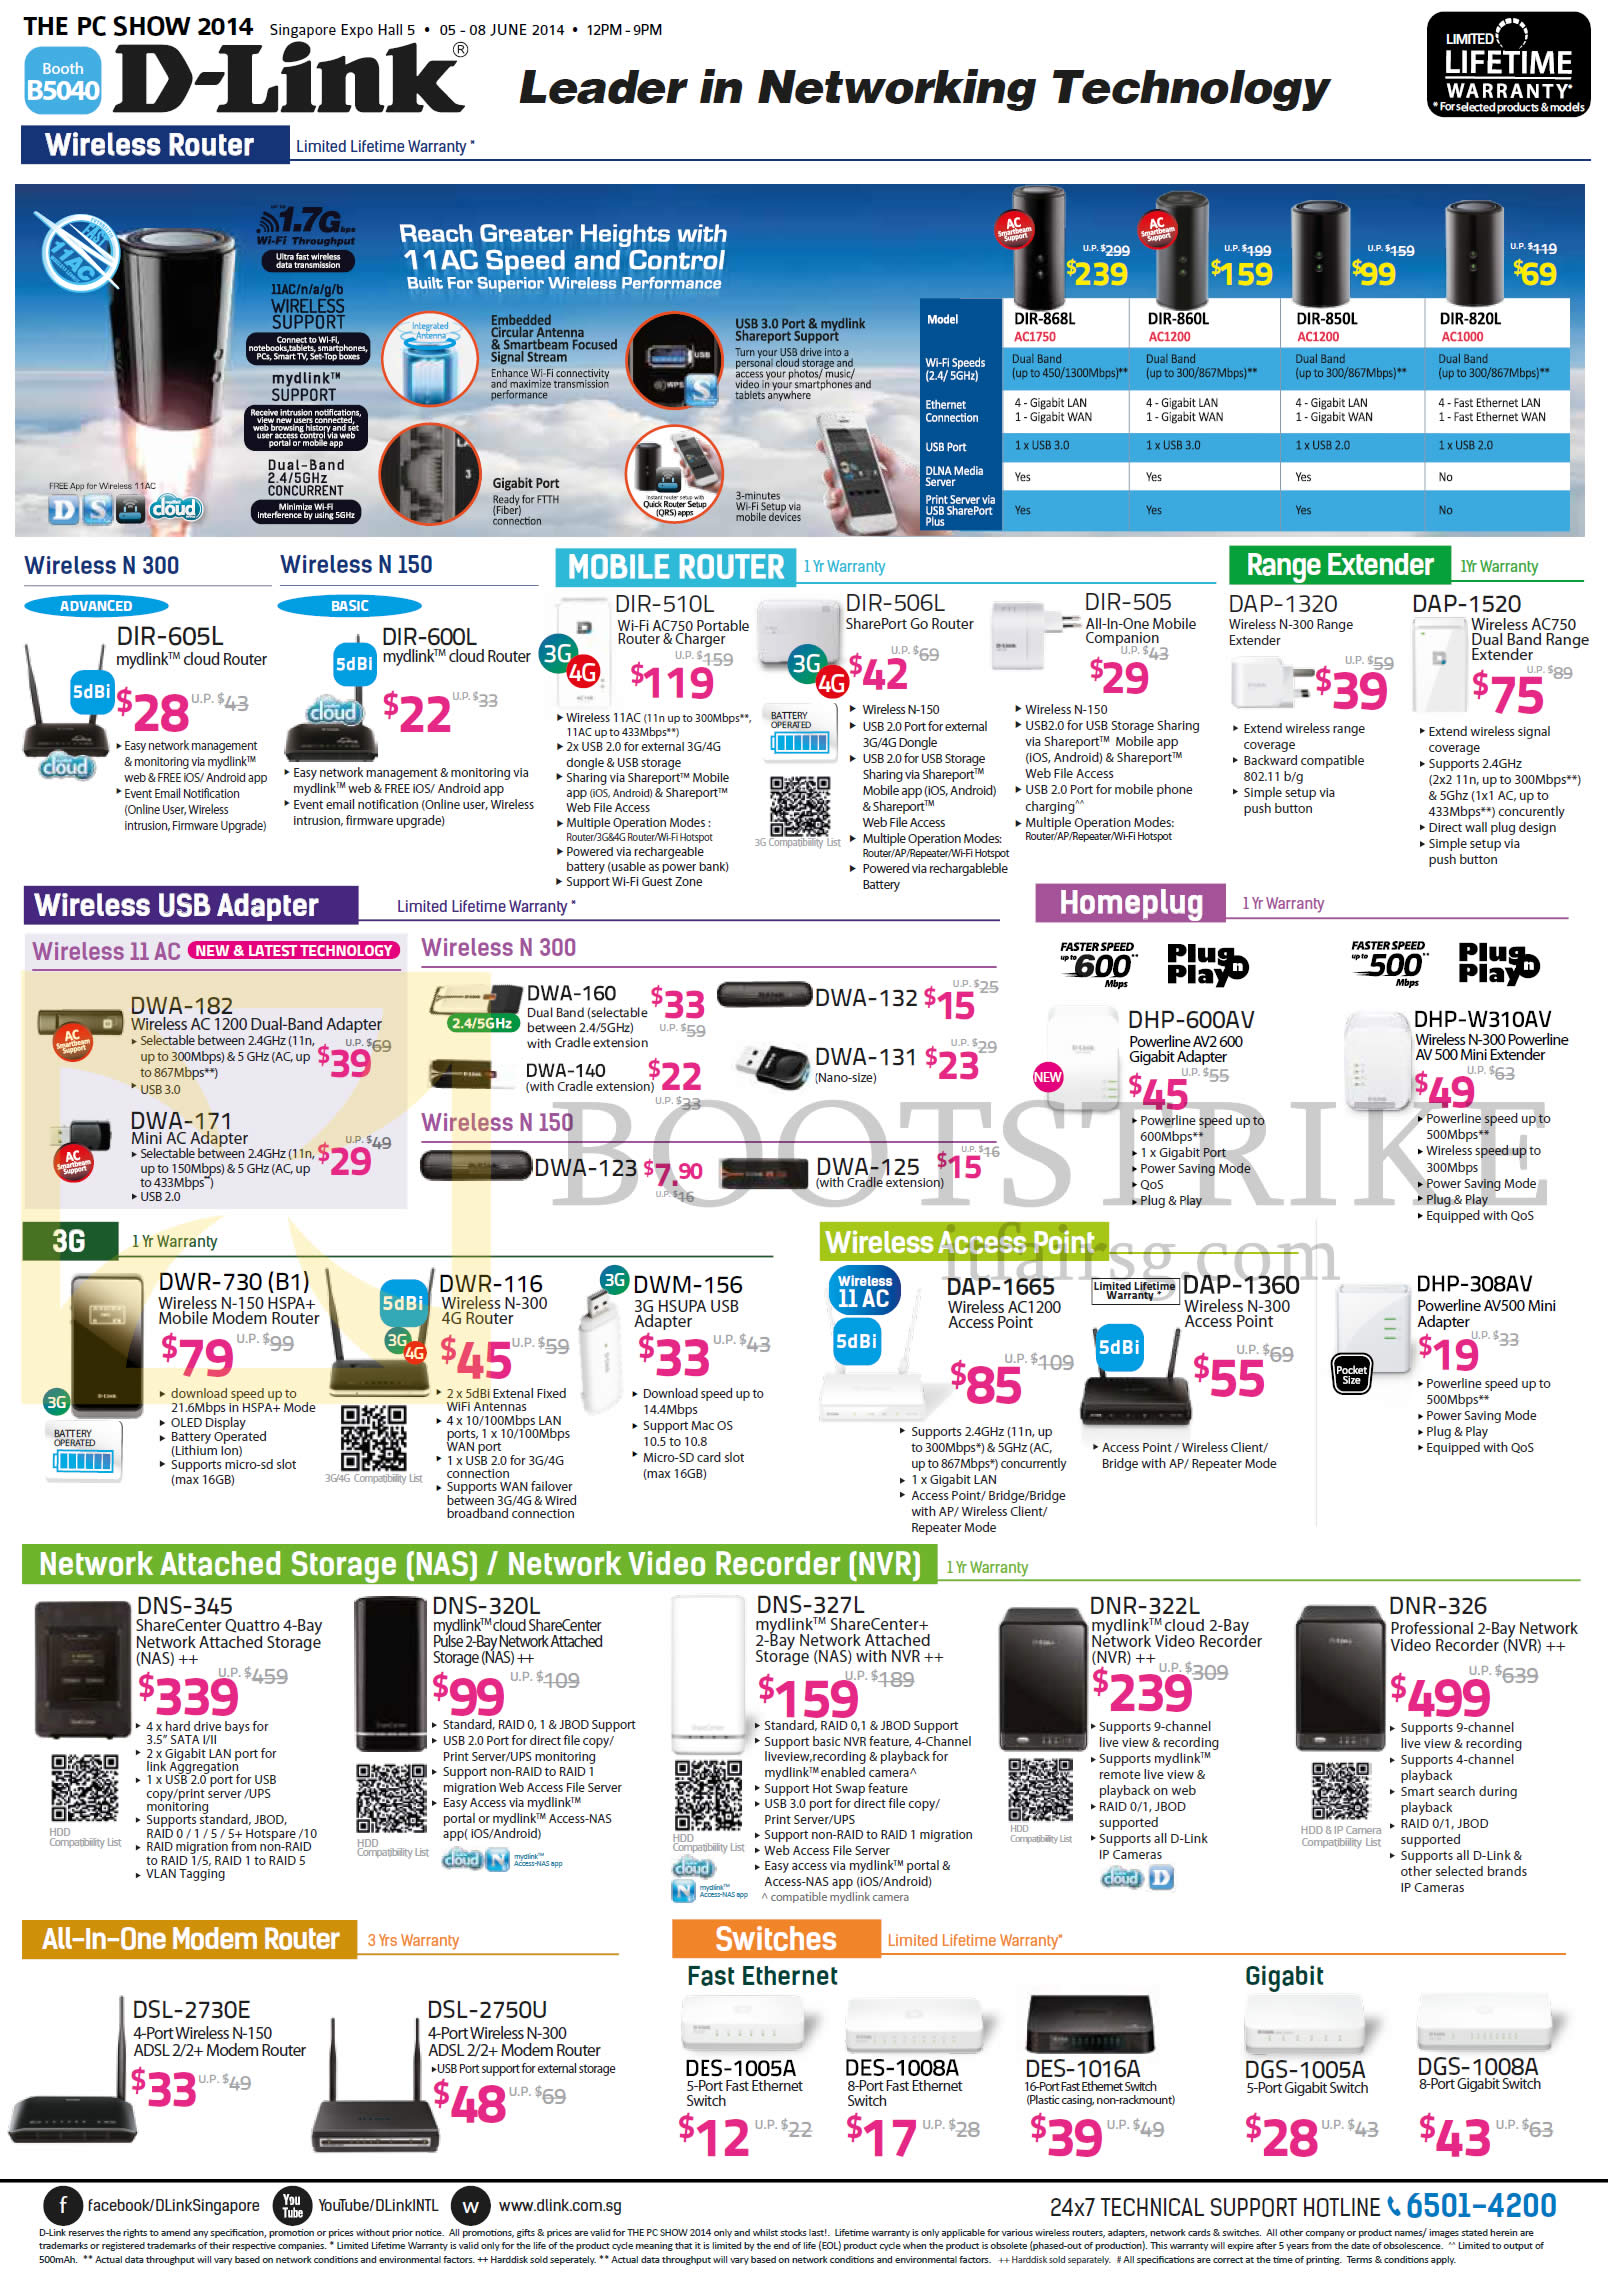 PC SHOW 2014 price list image brochure of D-Link Networking Wireless USB Adapters, Homeplugs, NAS, NVR, Router, Switches, DIR-605L, 600L, 510L, 506L, 505, DAP-1320, 1520, DWR-730, 116, DNS-345, 320L, 327L